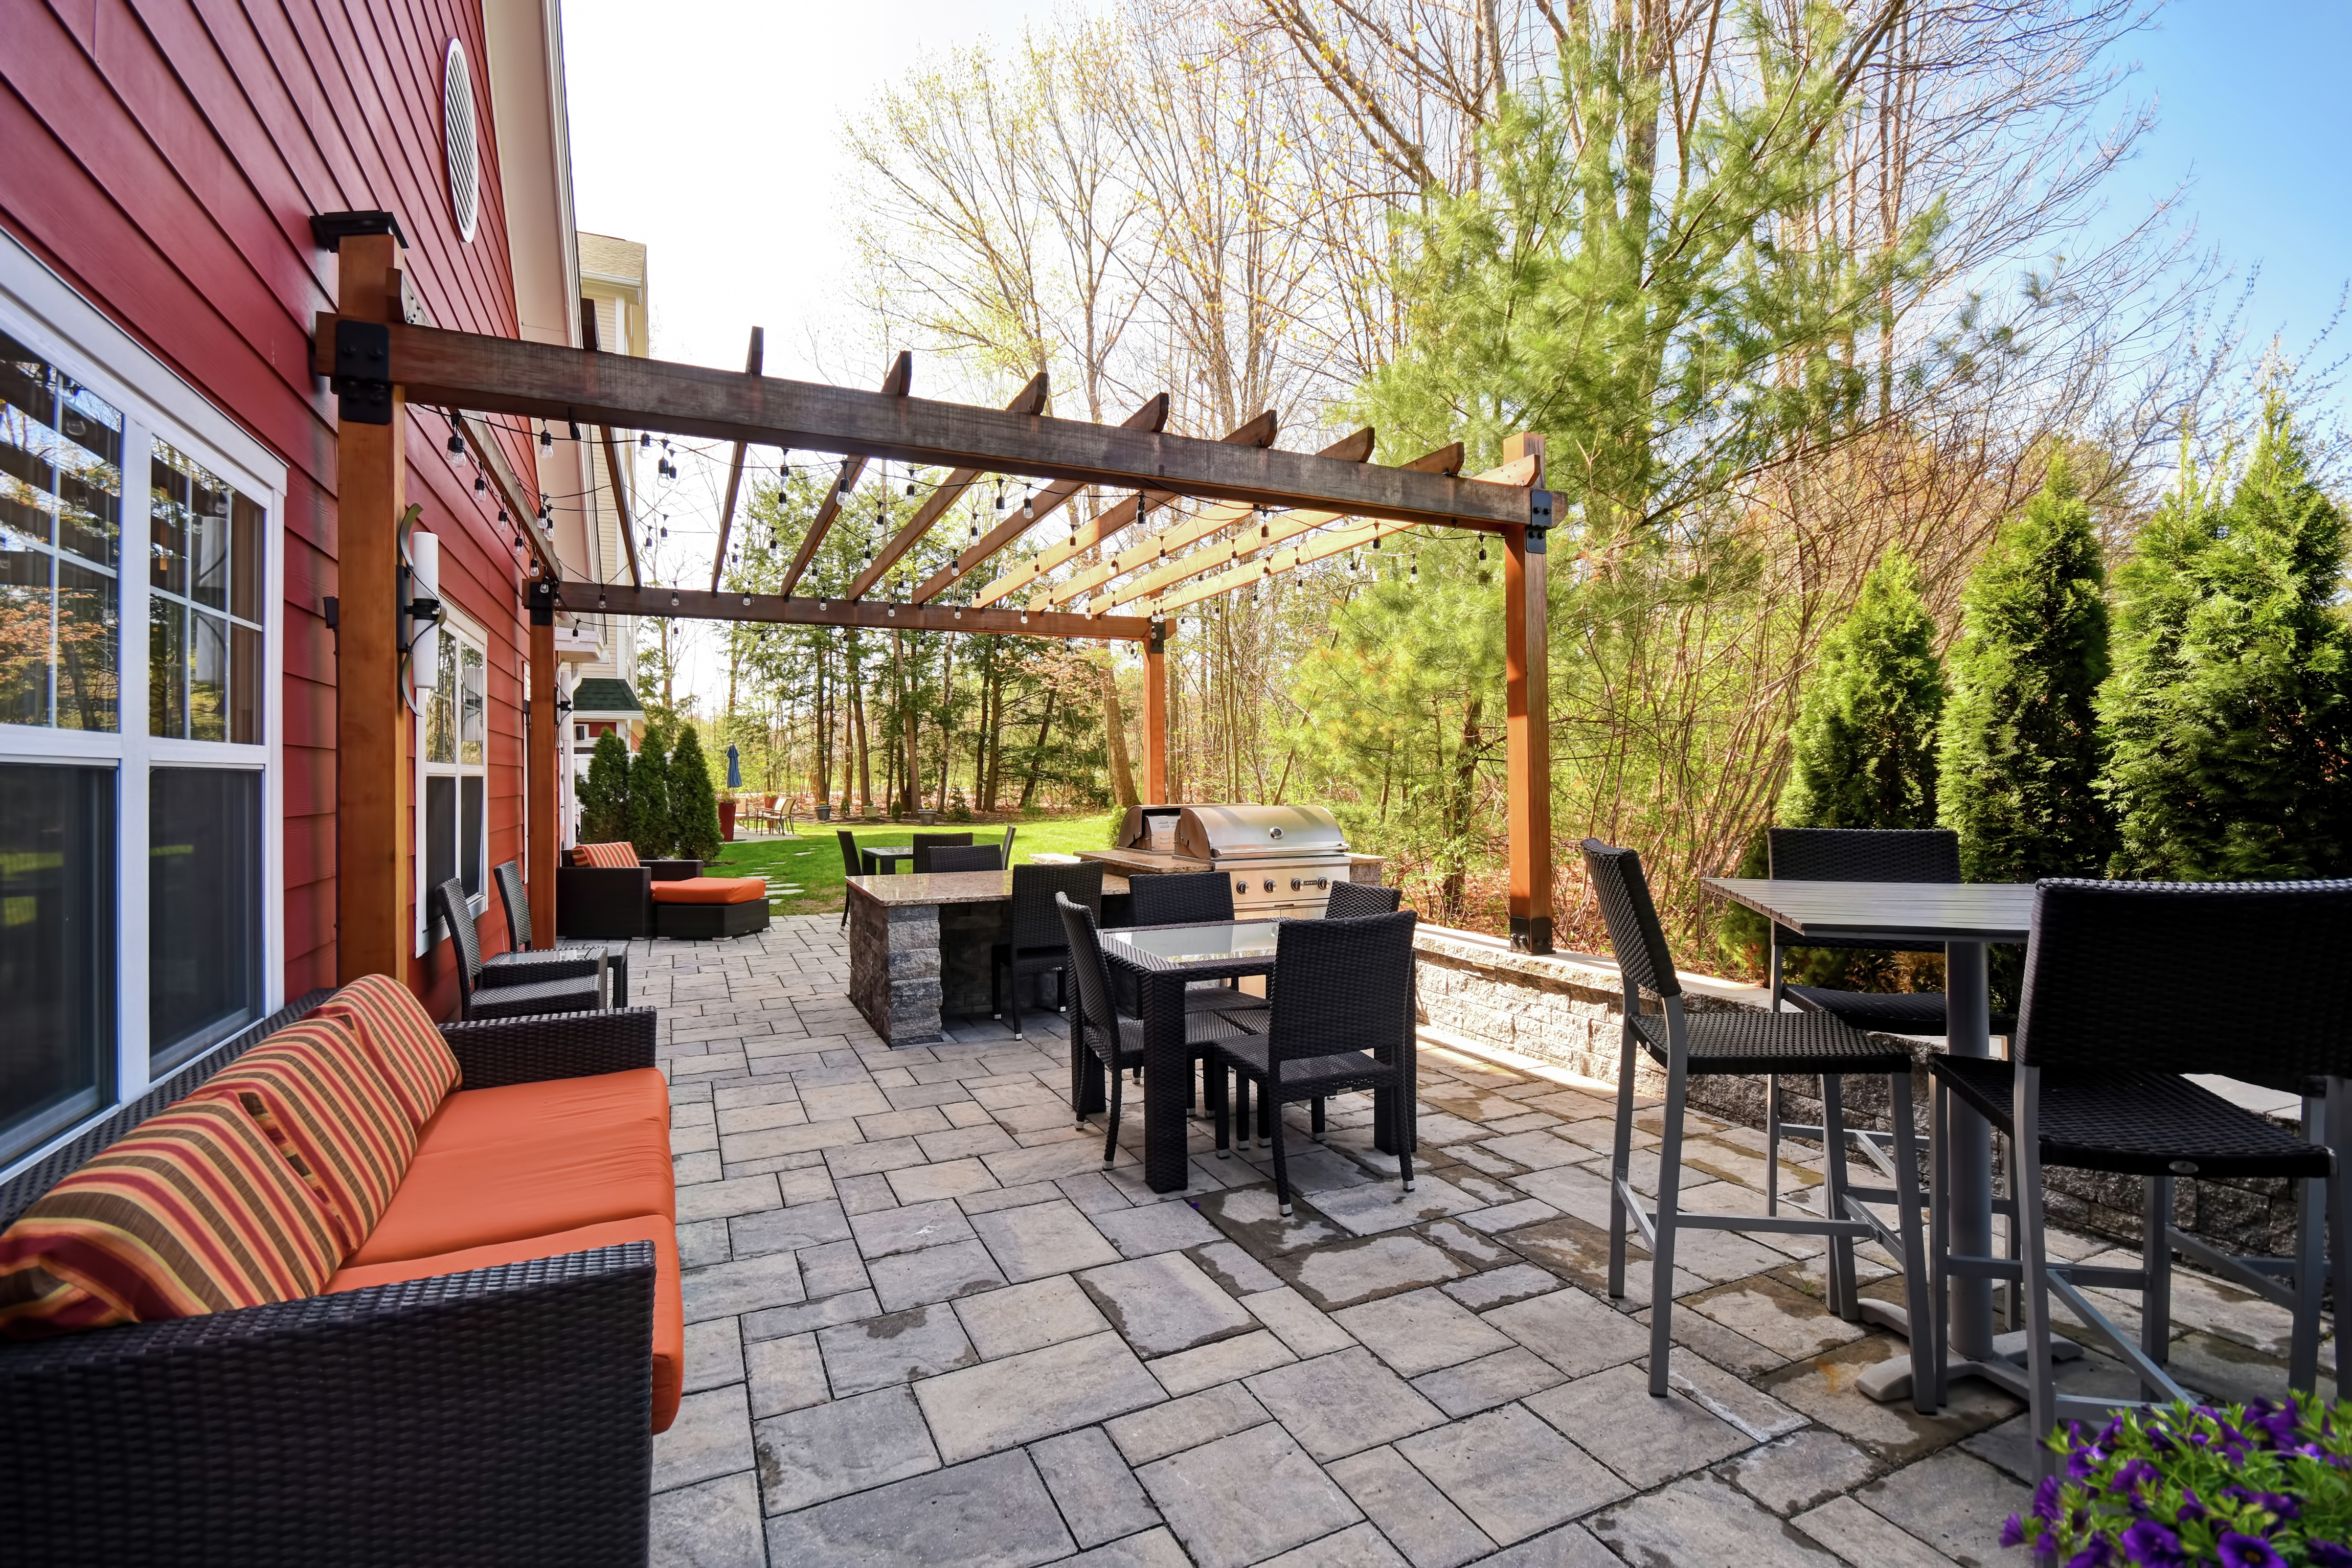 Exterior Patio Seating and Grills Daytime View